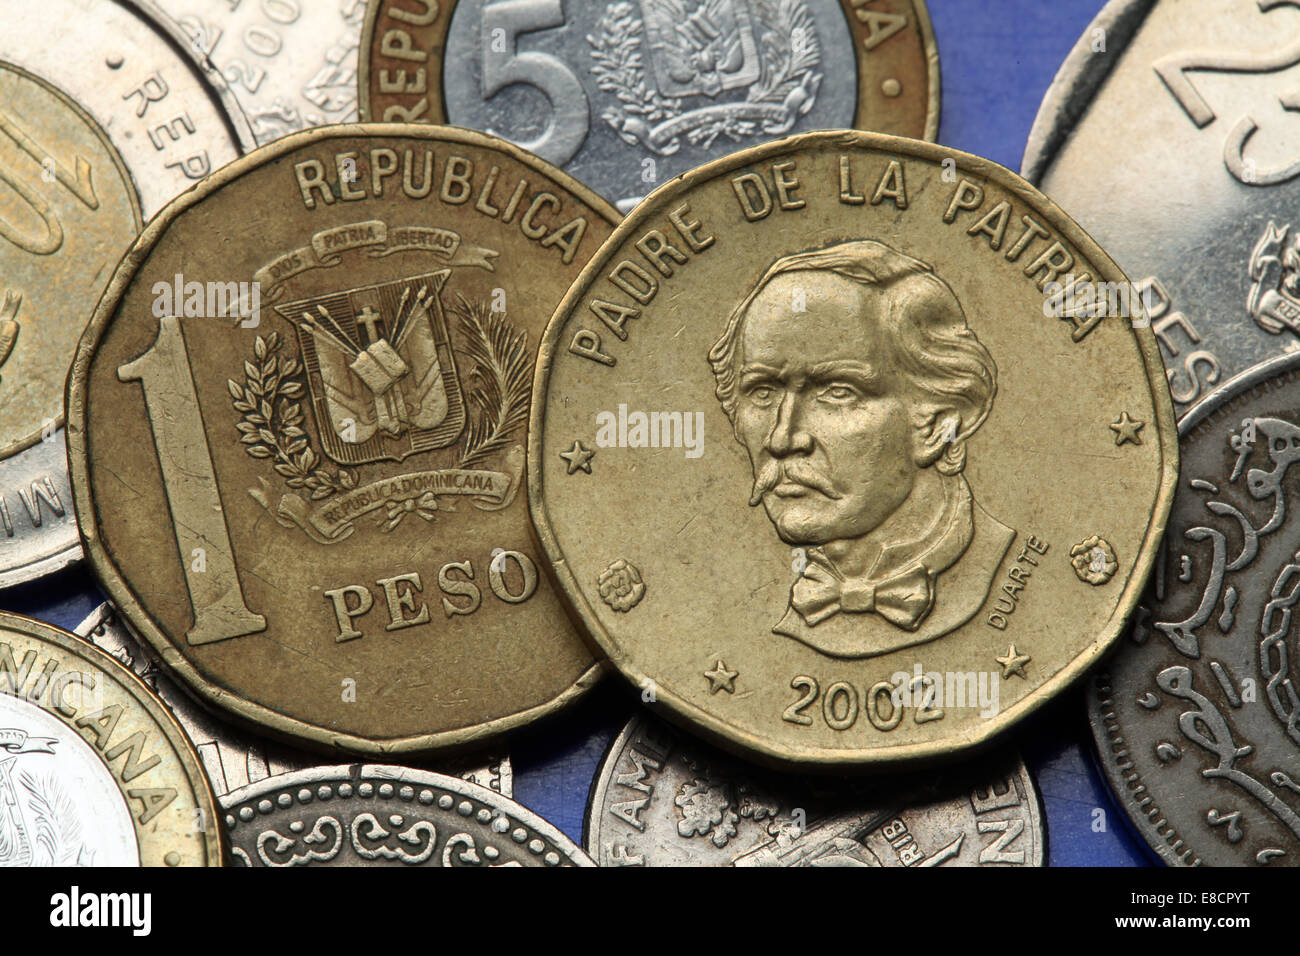 Coins of the Dominican Republic. Dominican national hero Juan Pablo Duarte depicted in the Dominican one peso coin. Stock Photo